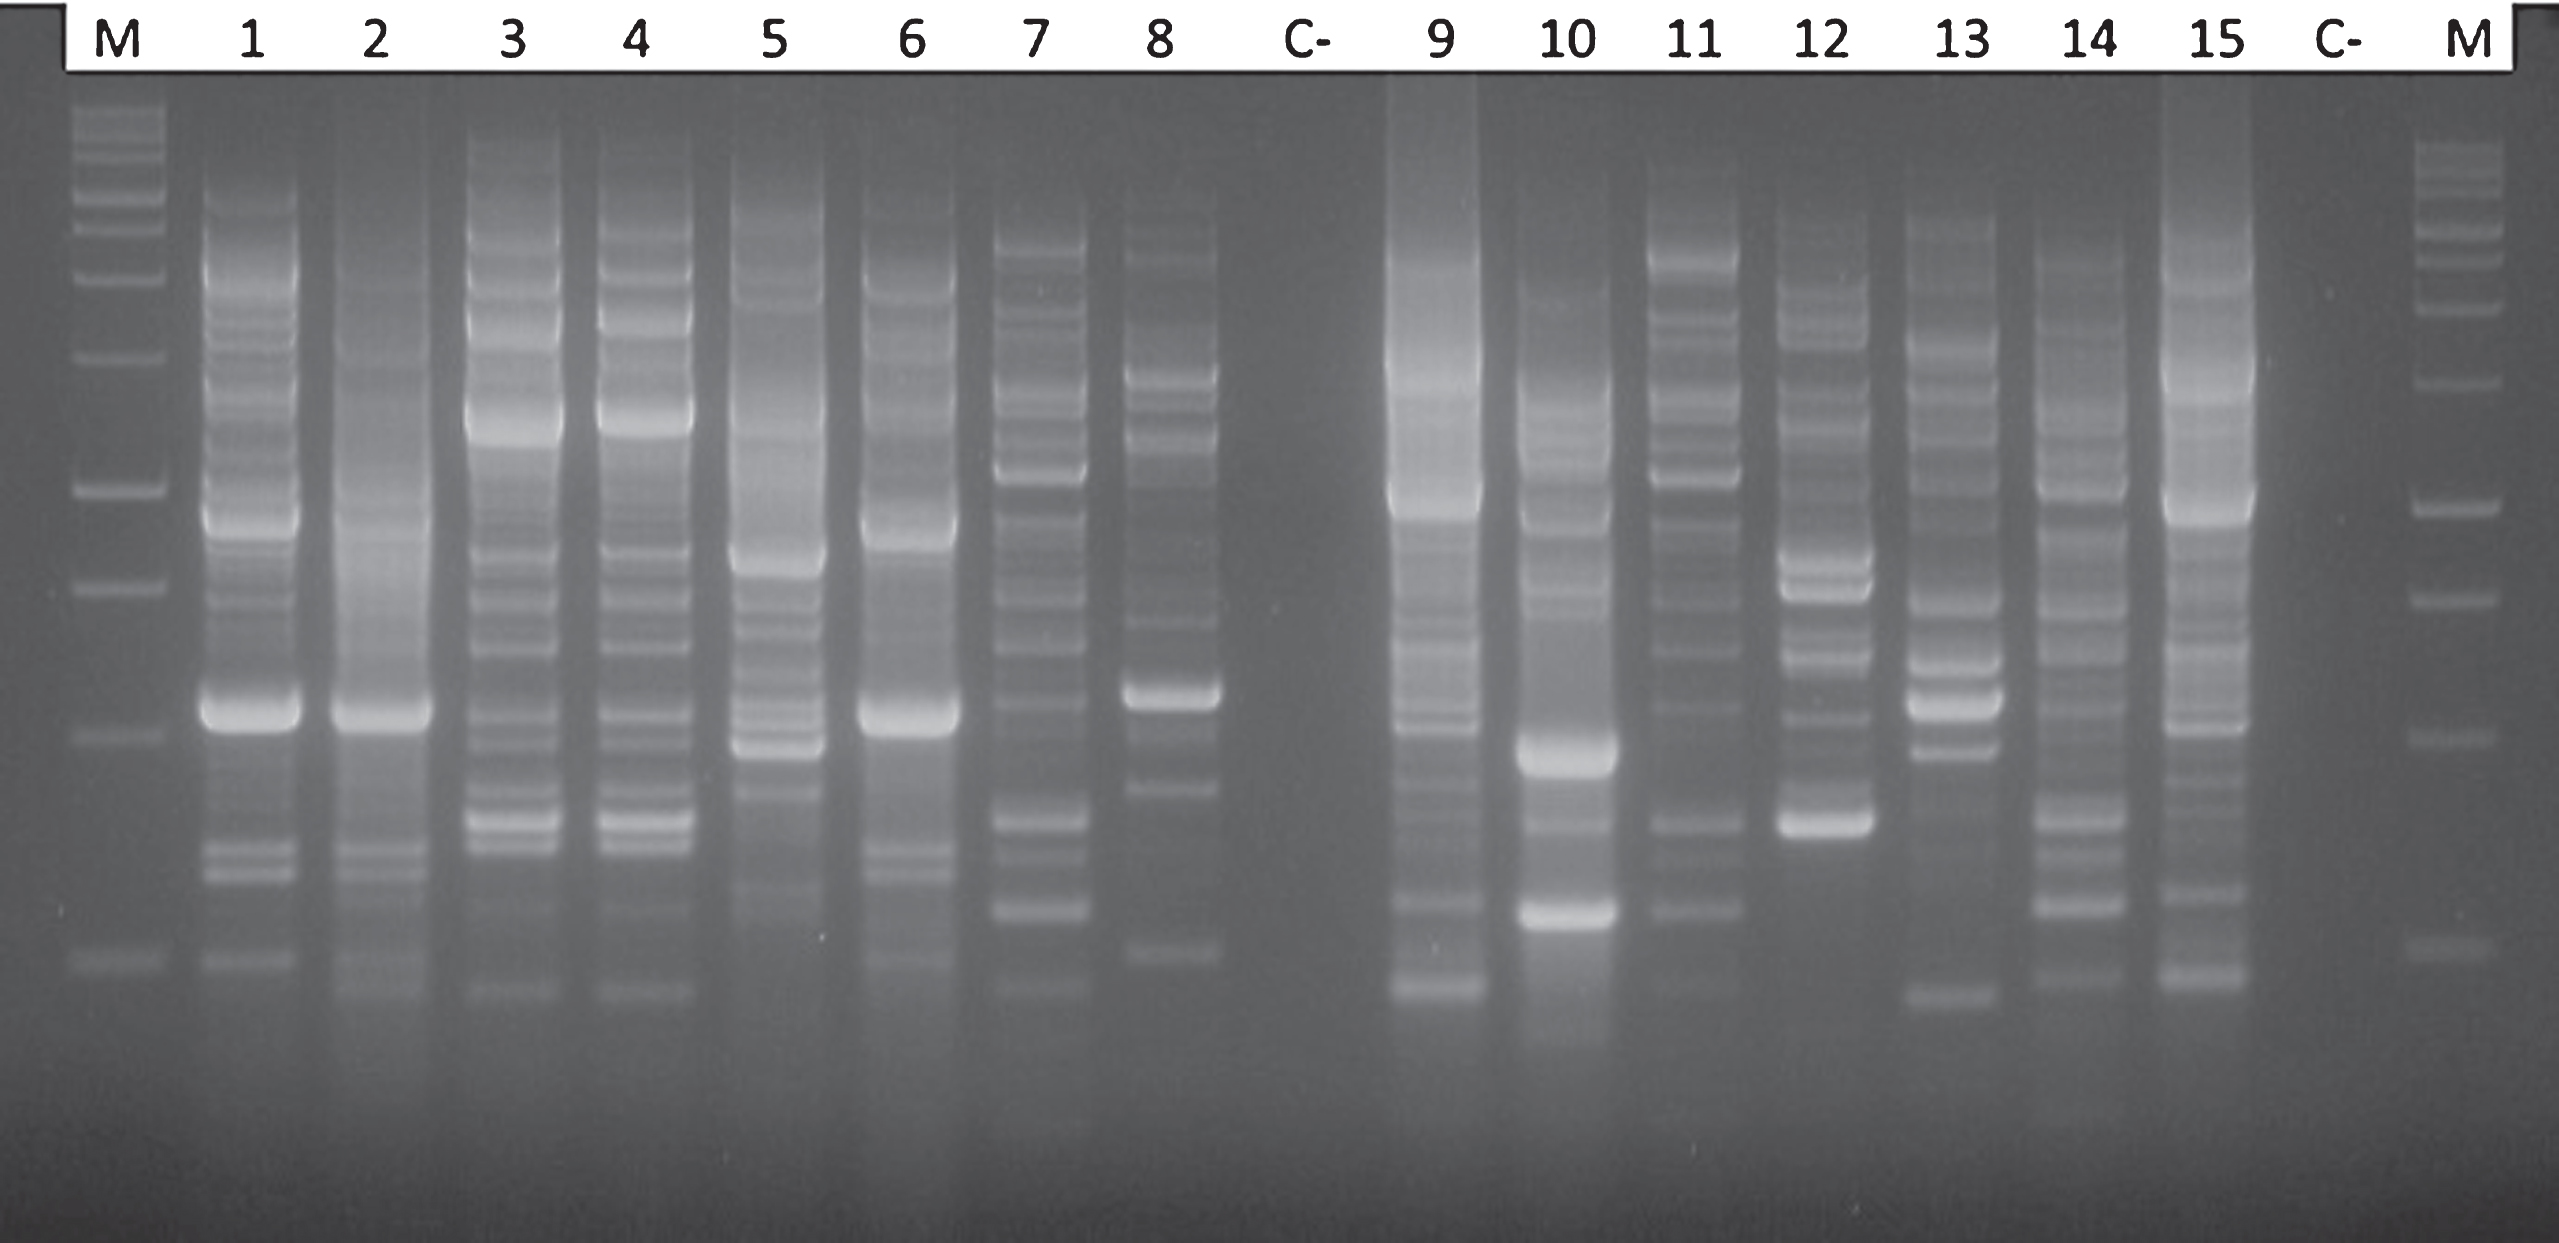 Comparison of electrophoretic patterns obtained after PCR amplification using the BOX primer (BOX-PCR) for different bacterial endophytes showing a strong antagonistic activity against Pseudomonas syringae pv. actinidiae. In the first and in the last lanes the 100 bp DNA ladder; lanes 1, 2 and 6: Pseudomonas fluorescens; lanes 3 and 4: Pantoea agglomerans; lane 5: Pseudomonas mendocina; lanes 7, 11 and 14 Pseudomonas synxantha; lane 8 and 13: Enterobacter spp.; lanes 9 and 15: Pseudomonas putida biotype A; lane 10 and 12: Kluyvera spp.